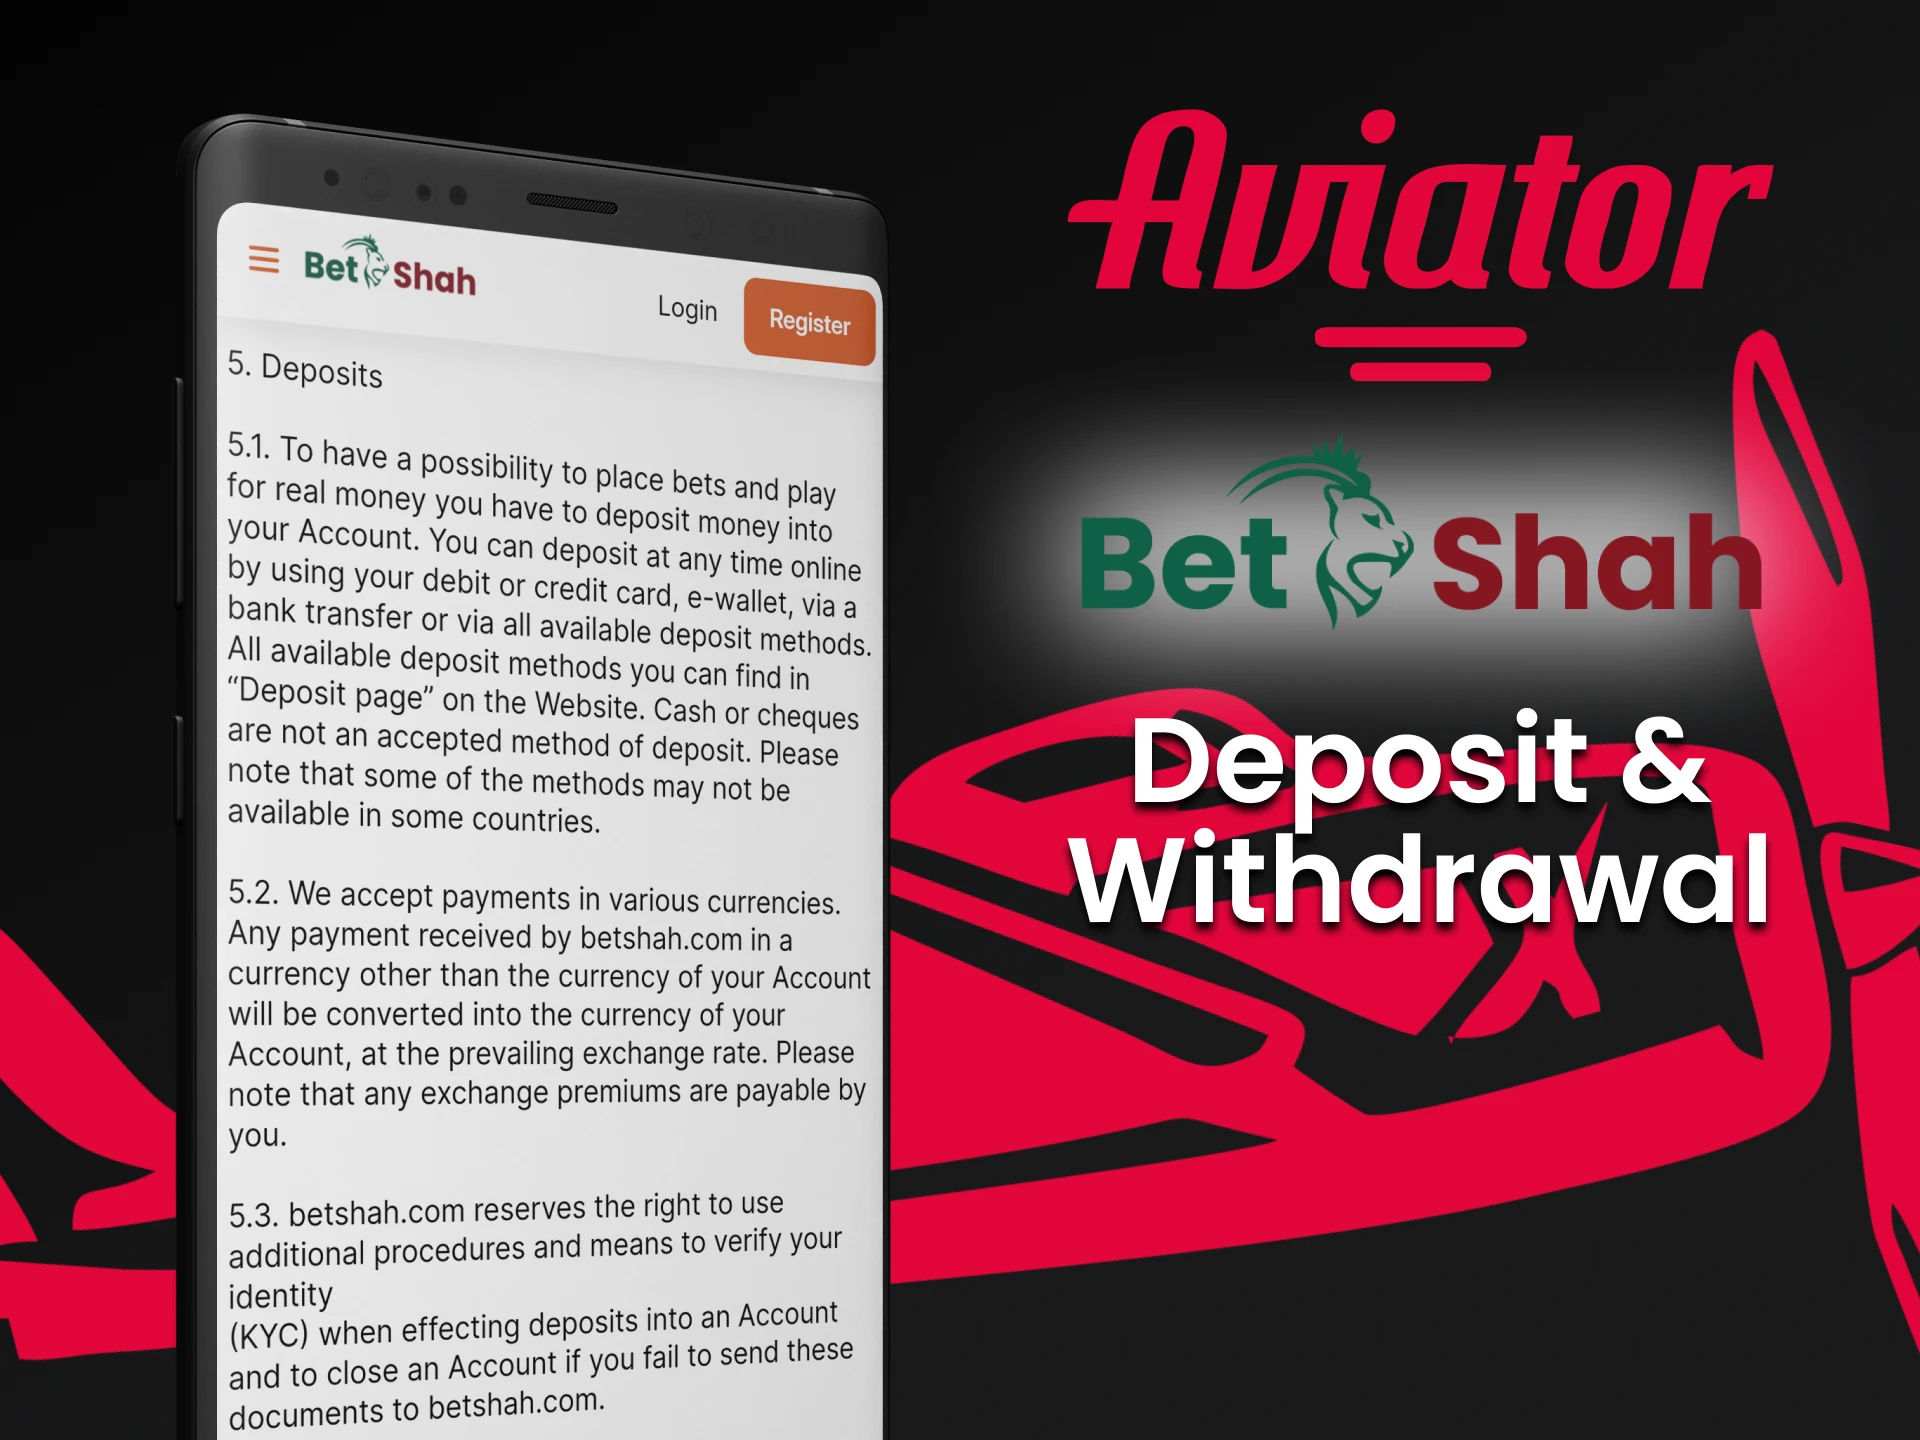 BetShah has a variety of transaction methods for Aviator.